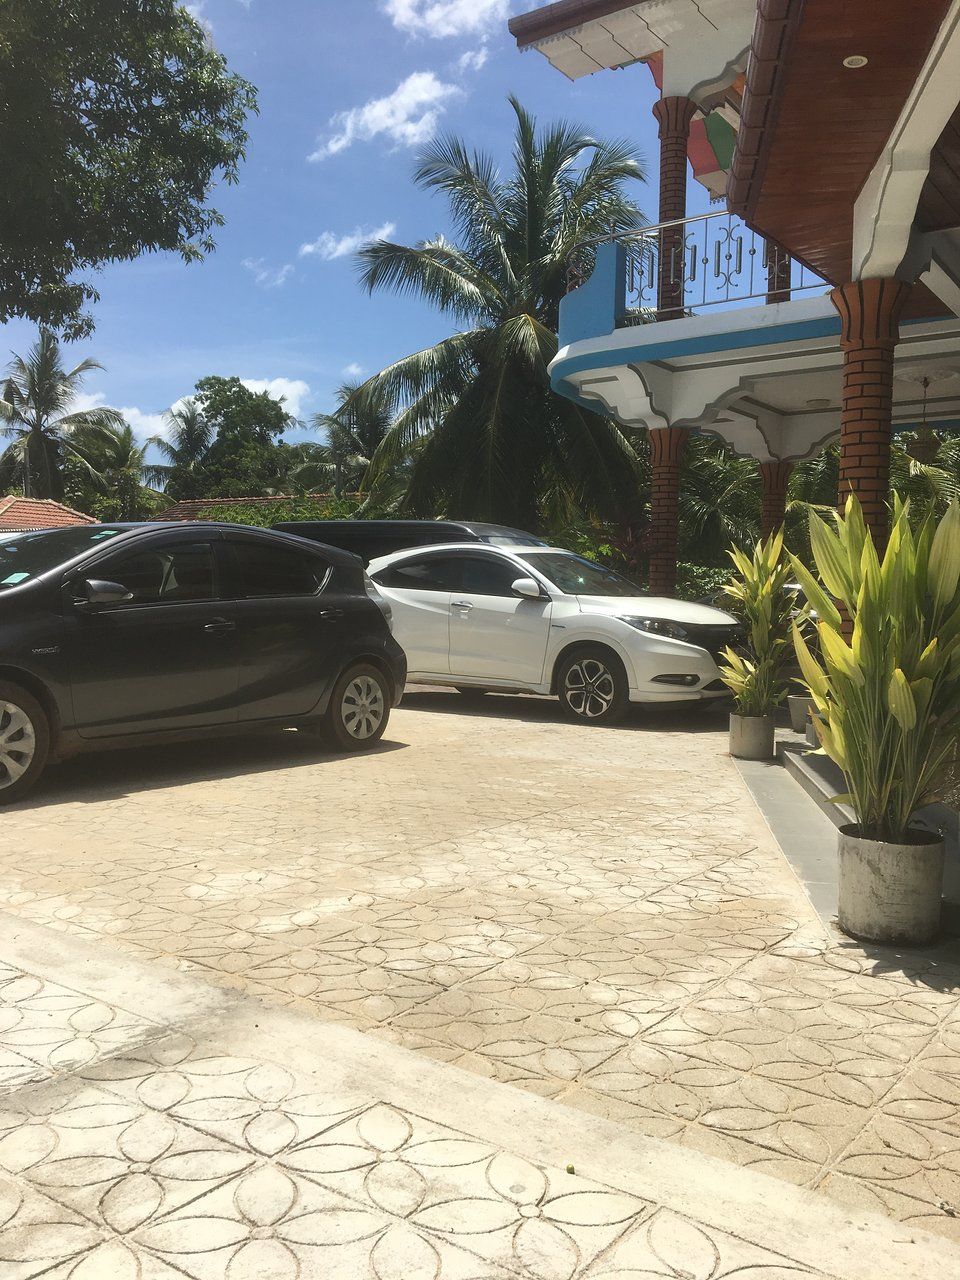 Parked cars in front of resort.